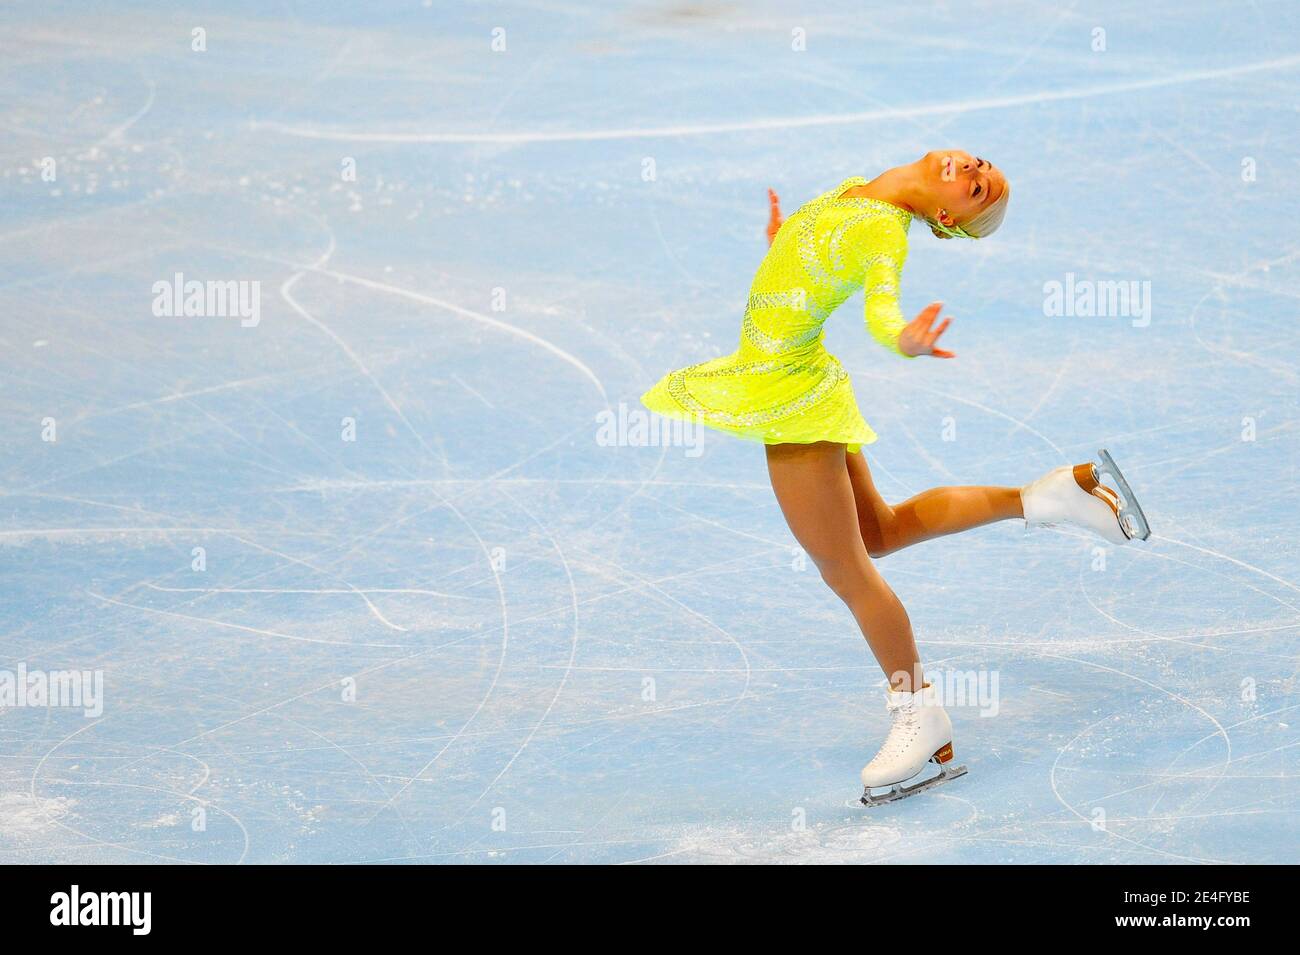 Kiira Korpi of Finland performs during the ladies short program ice skating event of the Eric Bompard Figure Skating trophy on 0ctober 16, 2009 at the Palais-Omnisports de Paris-Bercy, in Paris. Photo by Stephane Reix/ABACAPRESS.COM Stock Photo